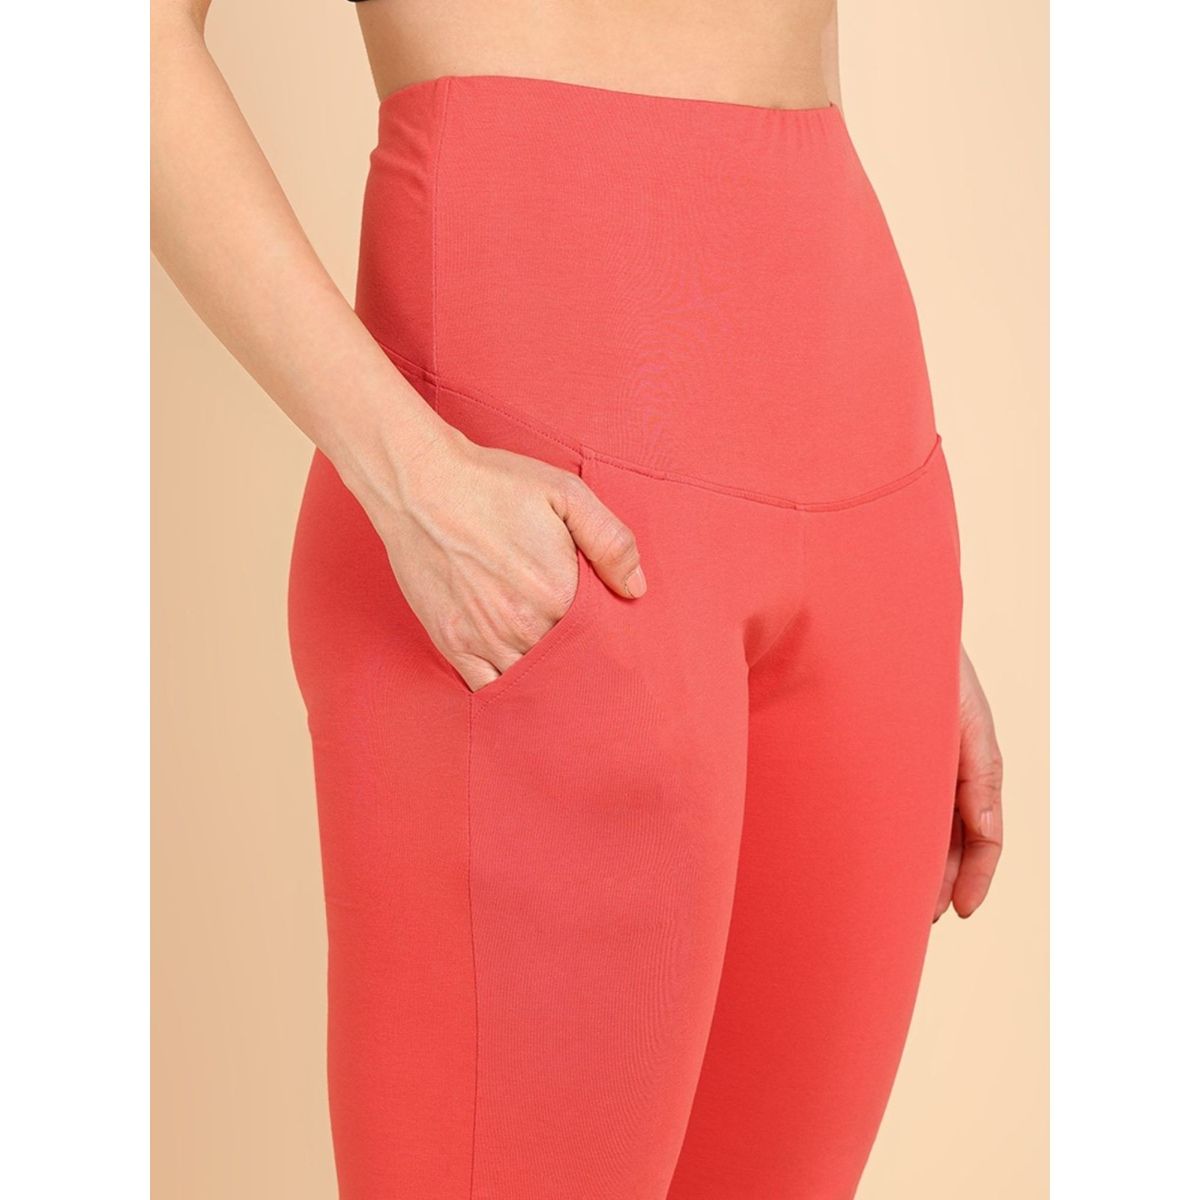 Mometernity Full Length Solid Over Belly Maternity Pants Black Online in  India, Buy at Best Price from Firstcry.com - 9175489